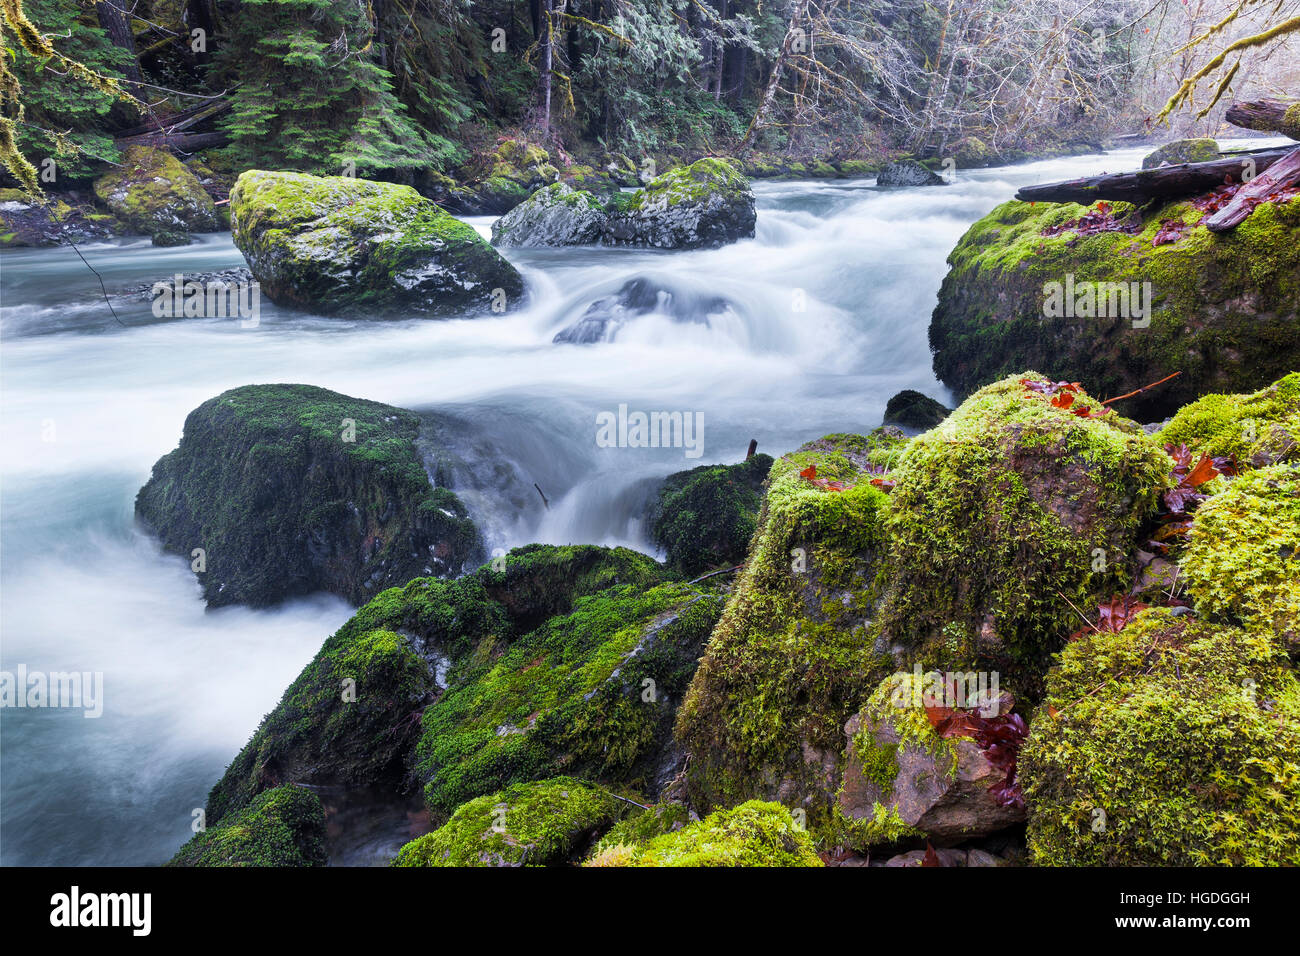 WA14008-00...WASHINGTON - The Dosewallips River in the Olympic National Forest Stock Photo